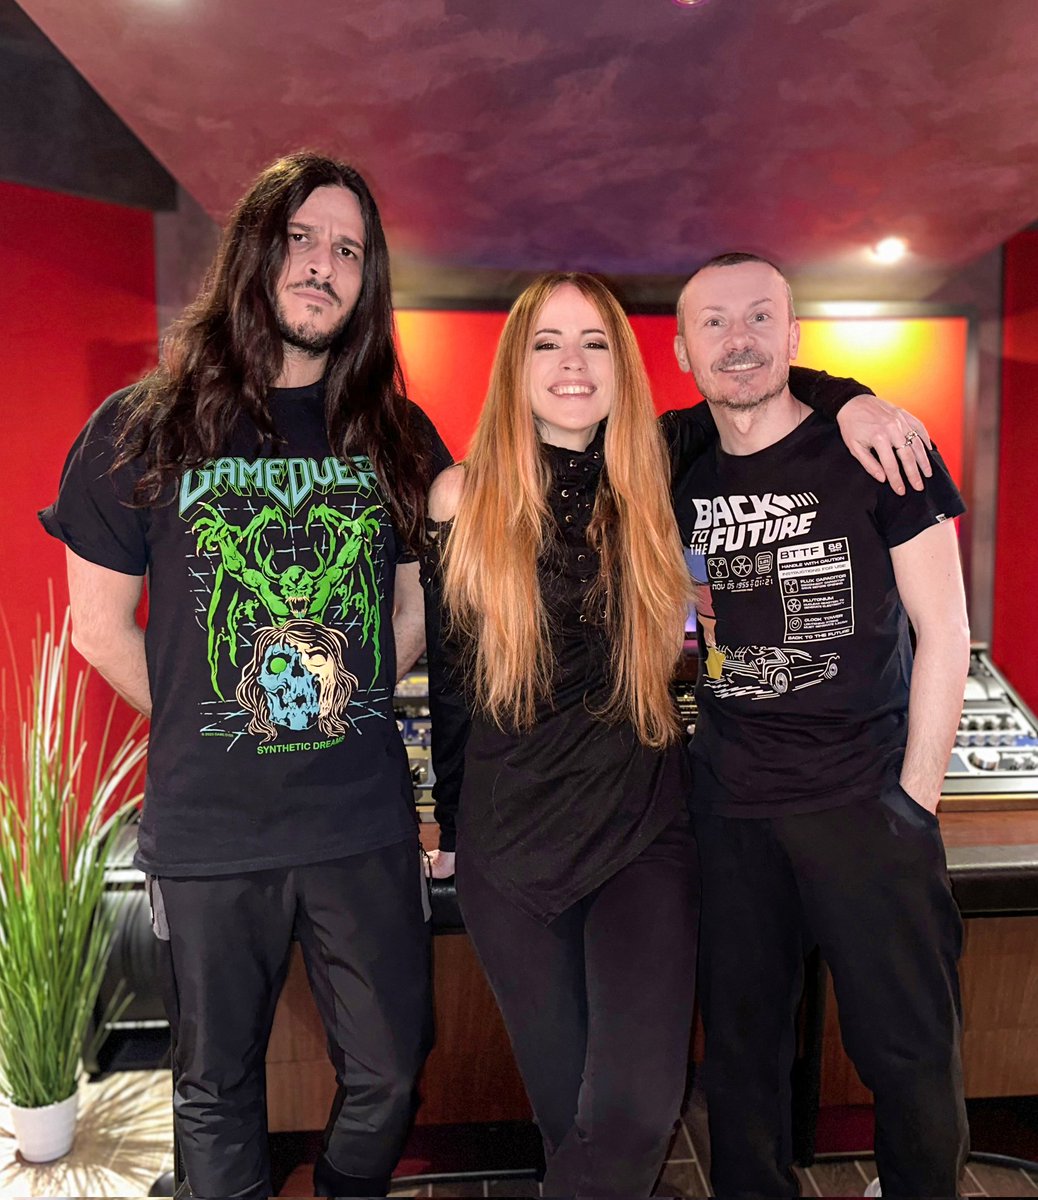 NEW ALBUM COMPLETE!!!
Do we look happy enough?😆
After some hints here and there, we can say we're happy and proud beyond words to finally be able to listen to this new material! @NapalmRecords